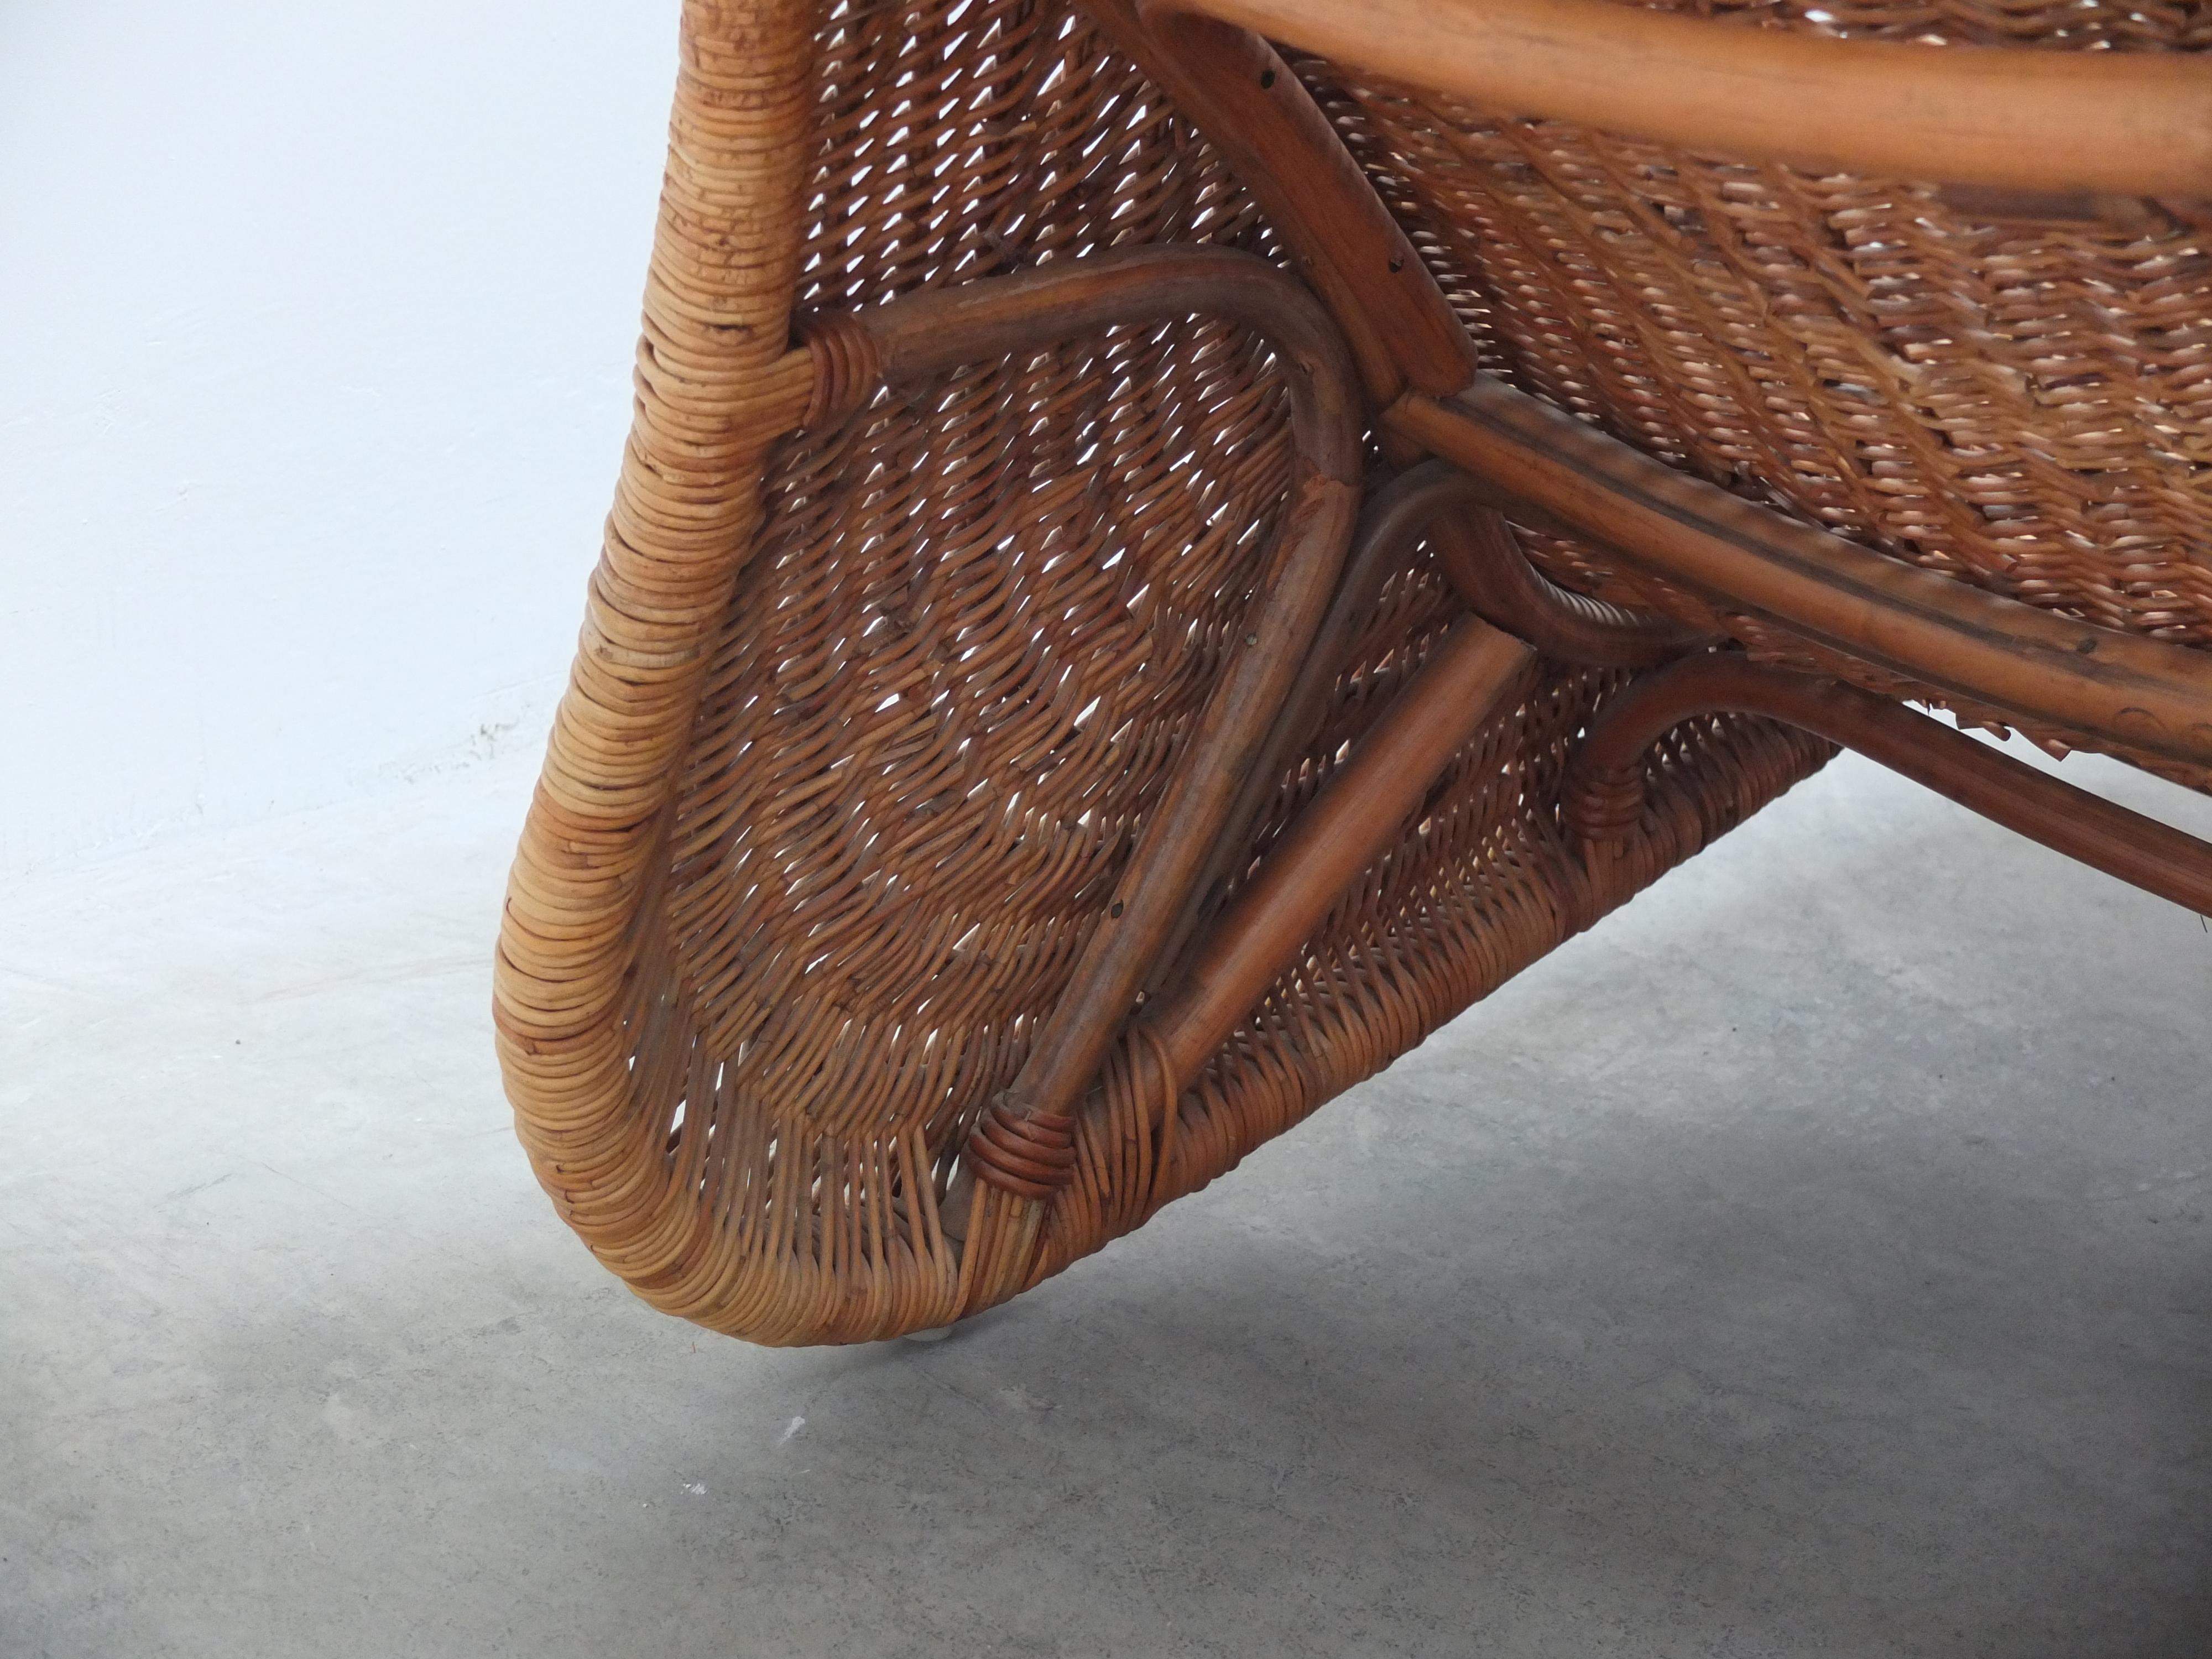 Rattan 'Karlskrona' Chaise Longue by Karl Malmvell for IKEA, 1998 For Sale 2